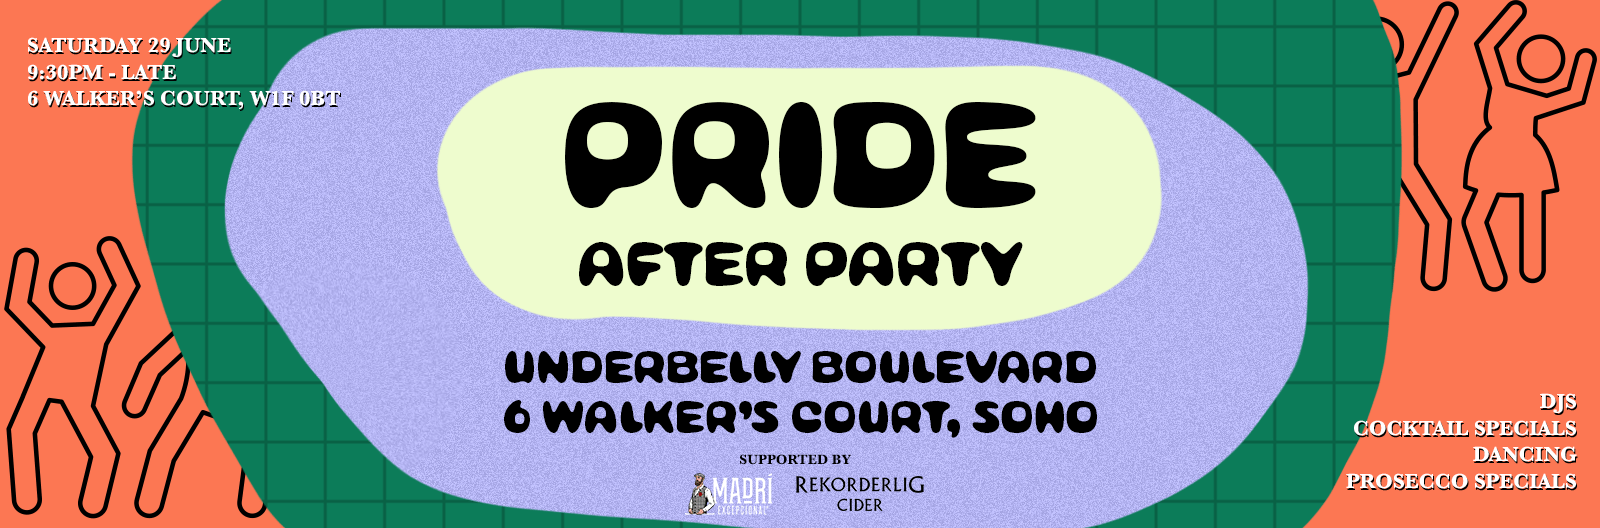 PRIDE After Party